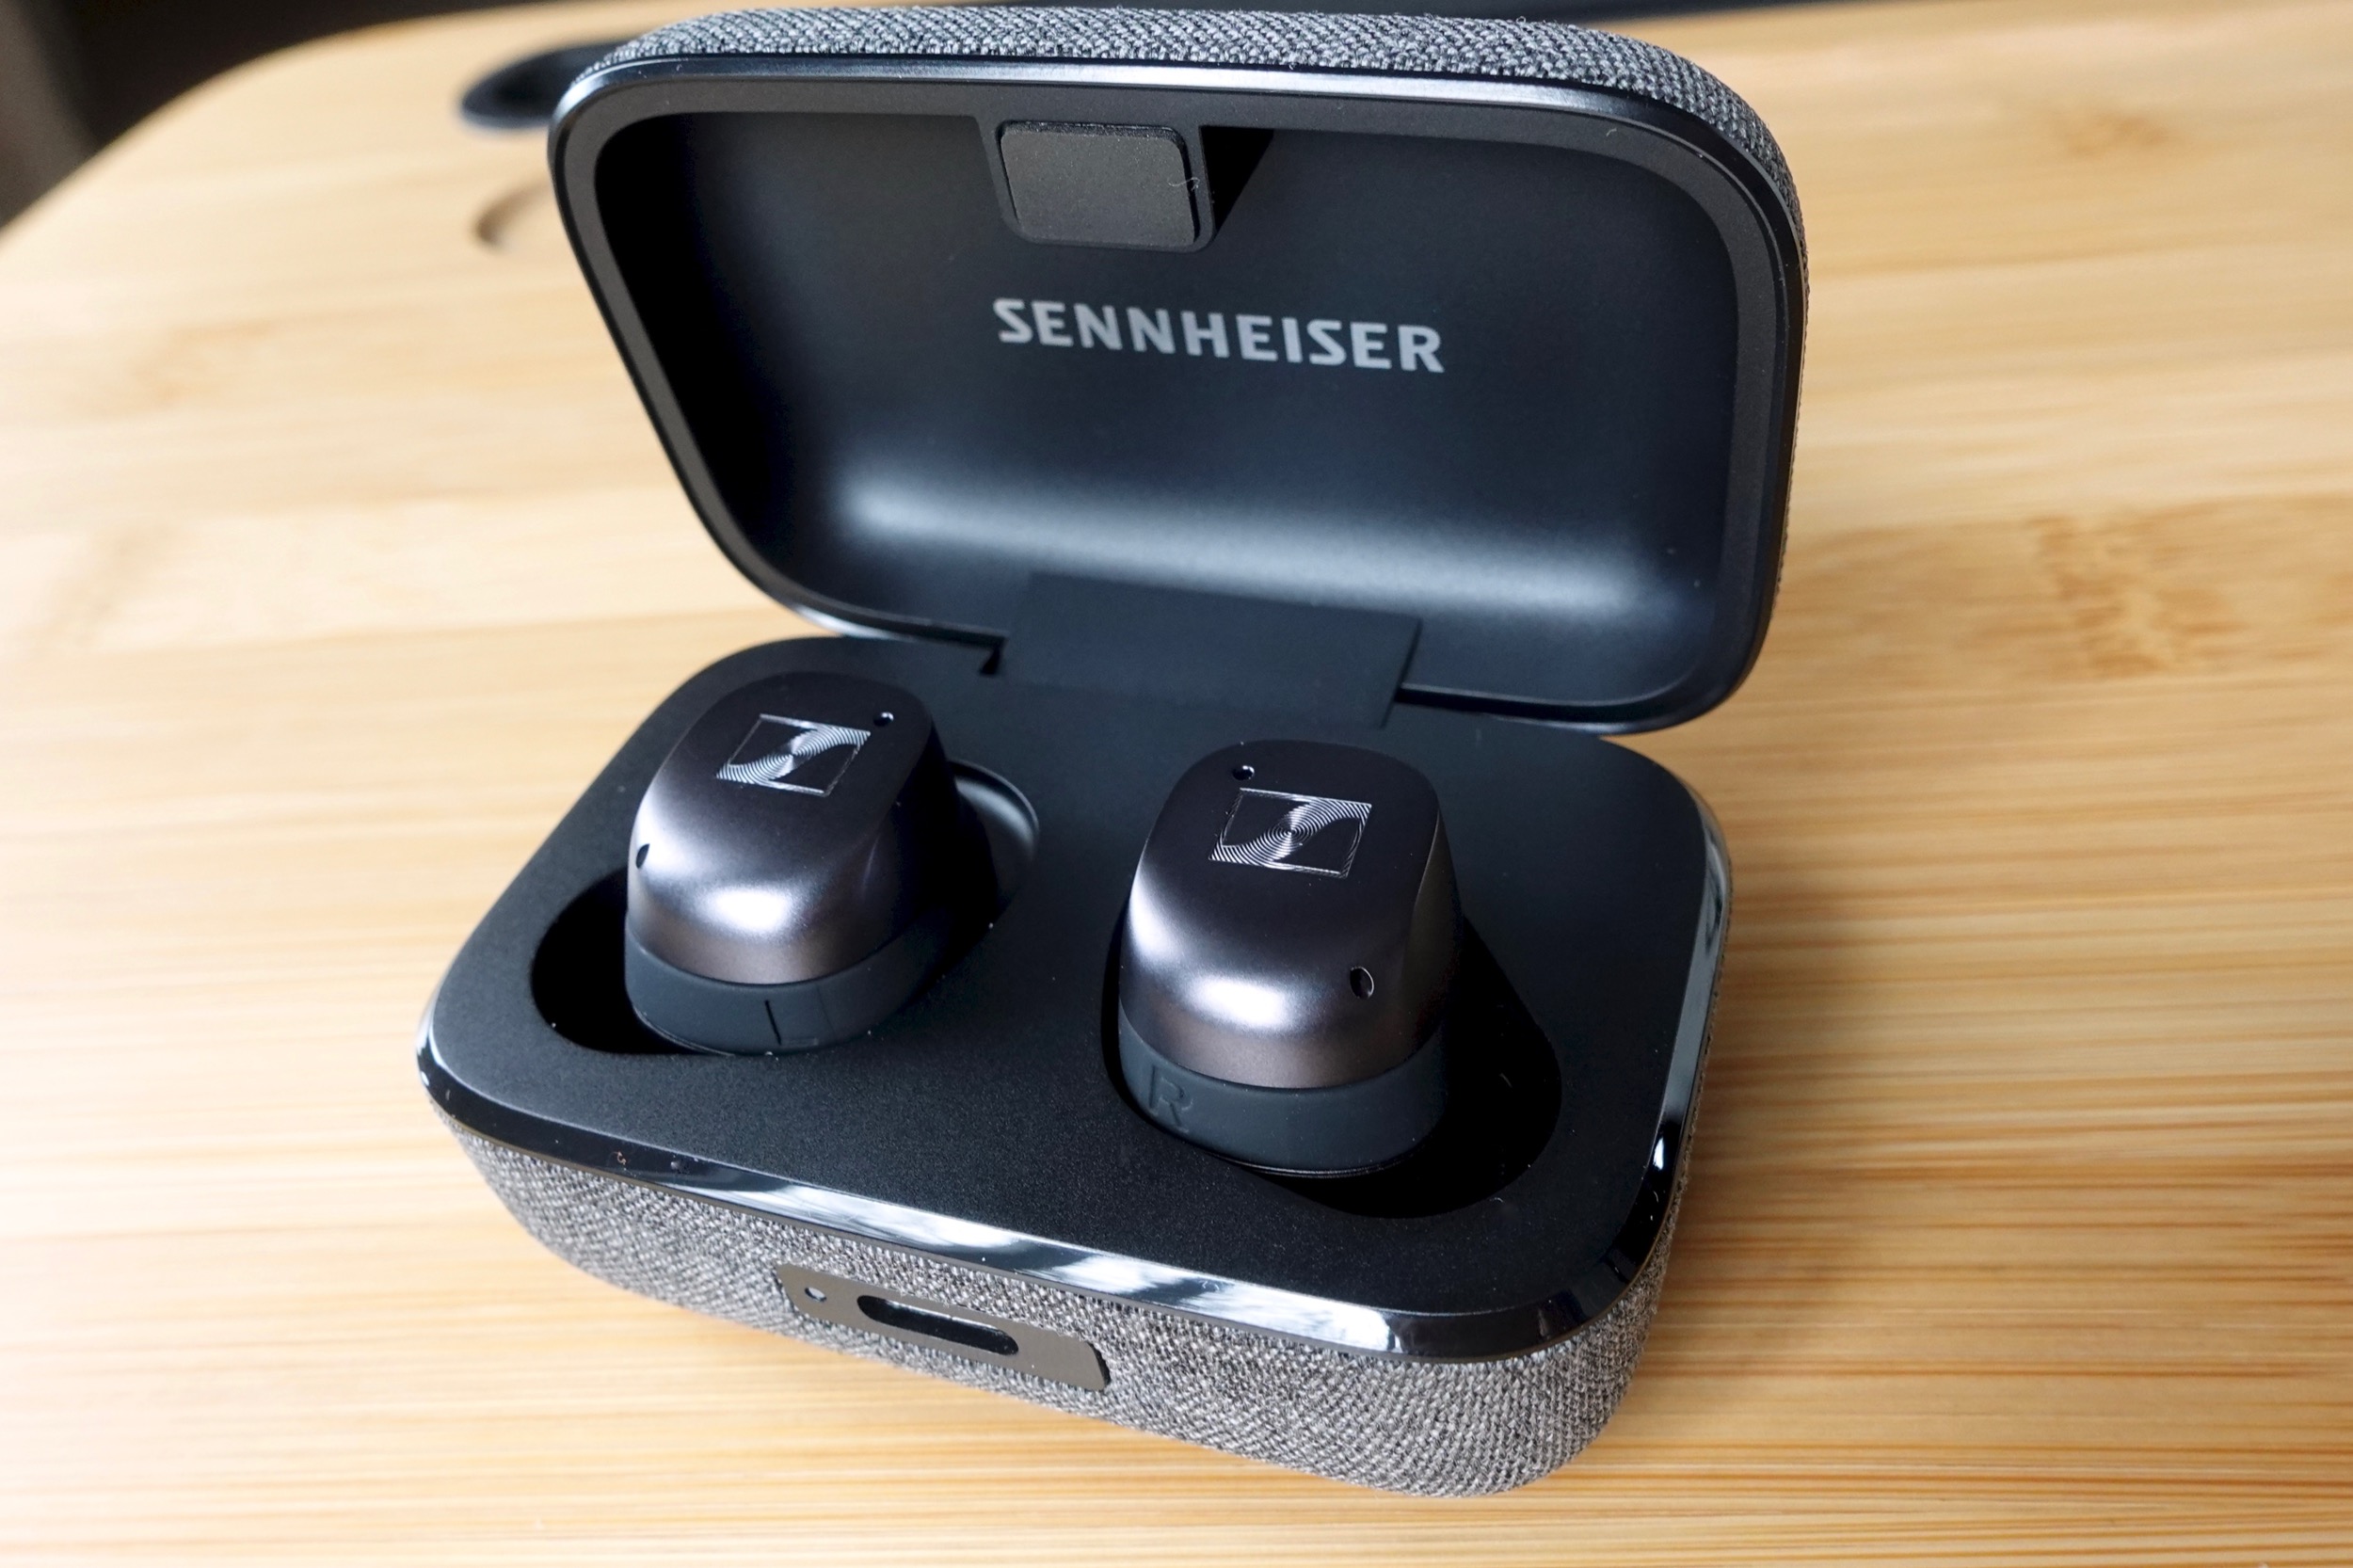 Sennheiser Momentum True Wireless 2 review: These earbuds beat out